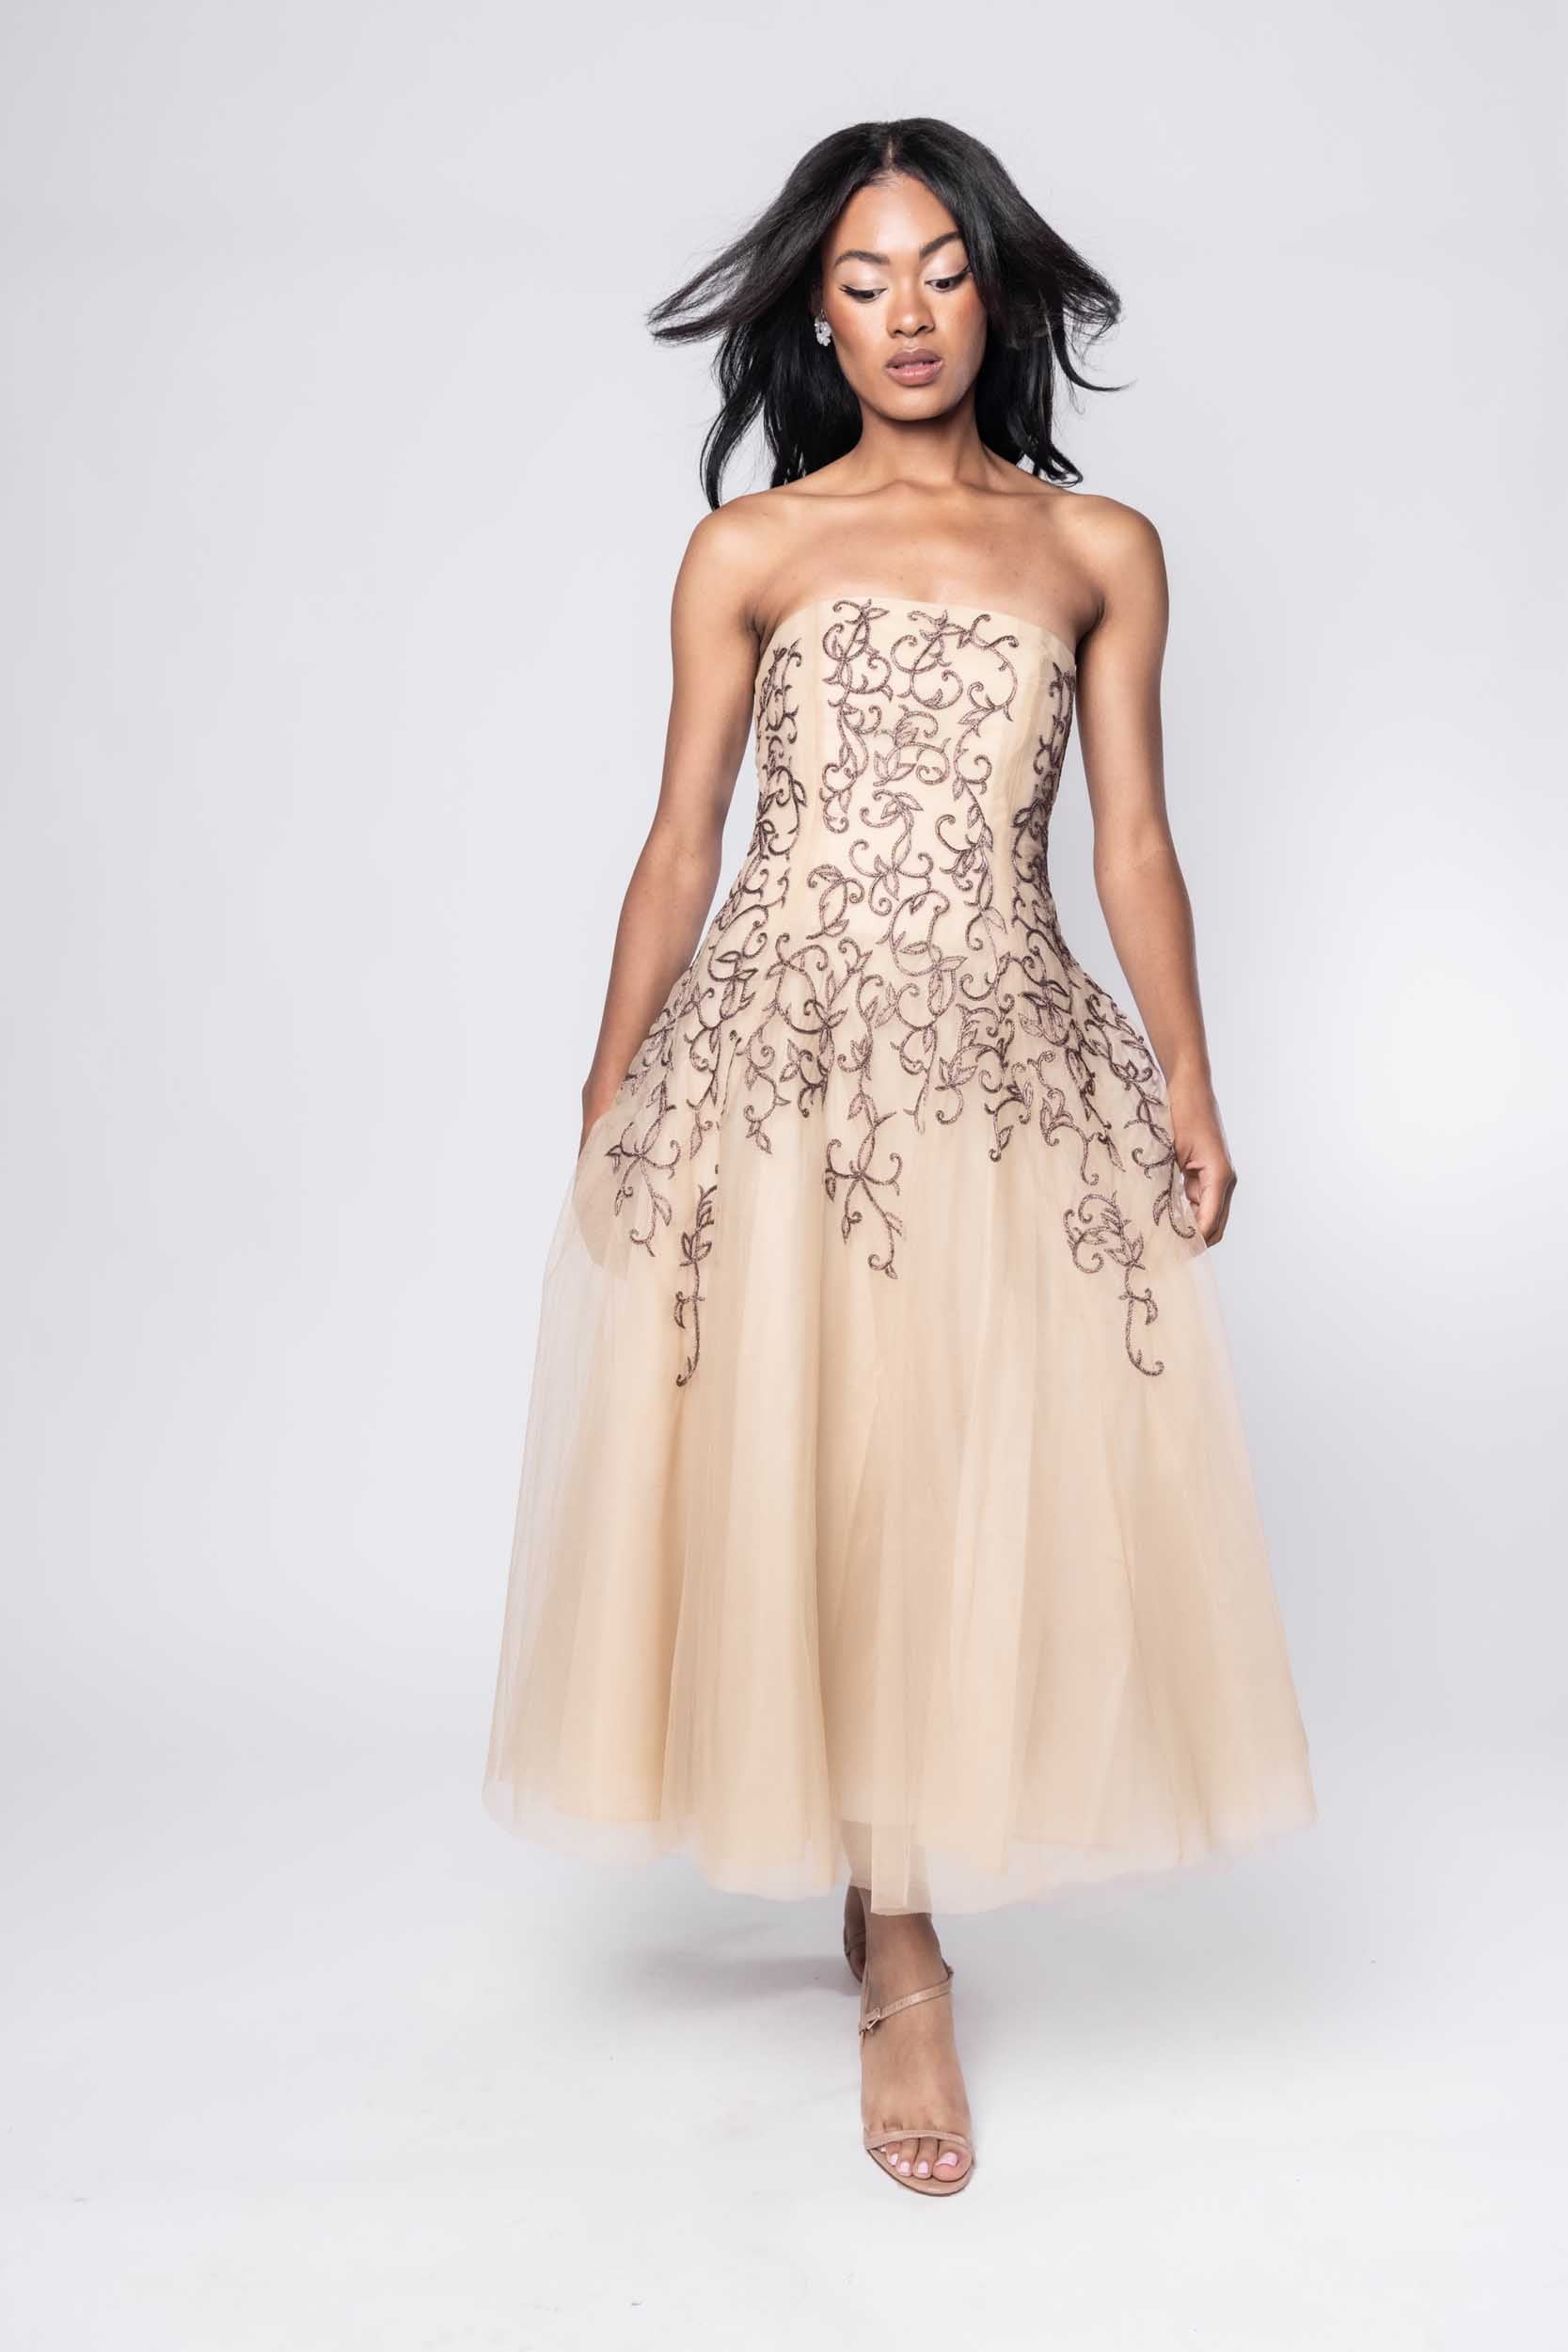 Beautiful model in nude Sujata Gazder dress with ornate stitching - front view movement